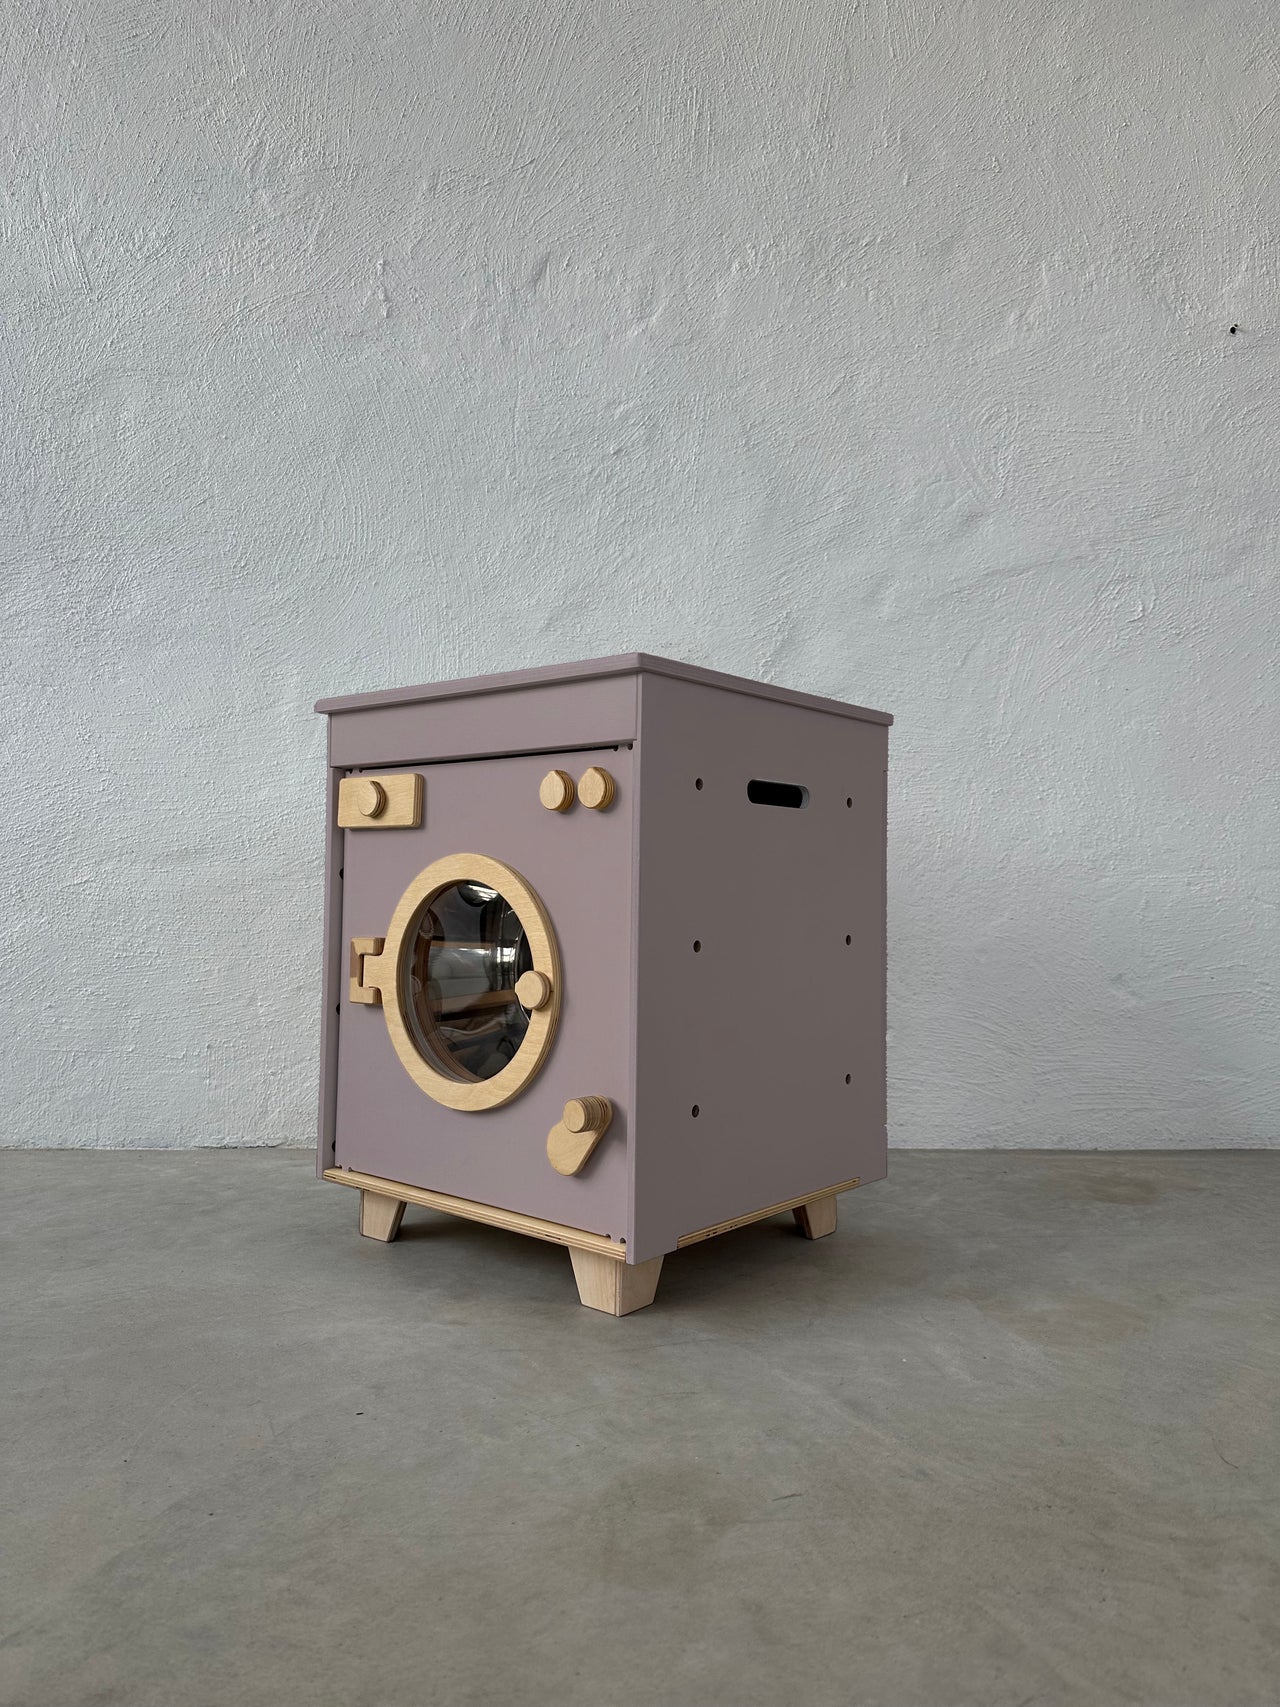 Wooden Washing Machine - Lilac - MIDMINI - Handcrafted wooden toys for generations.